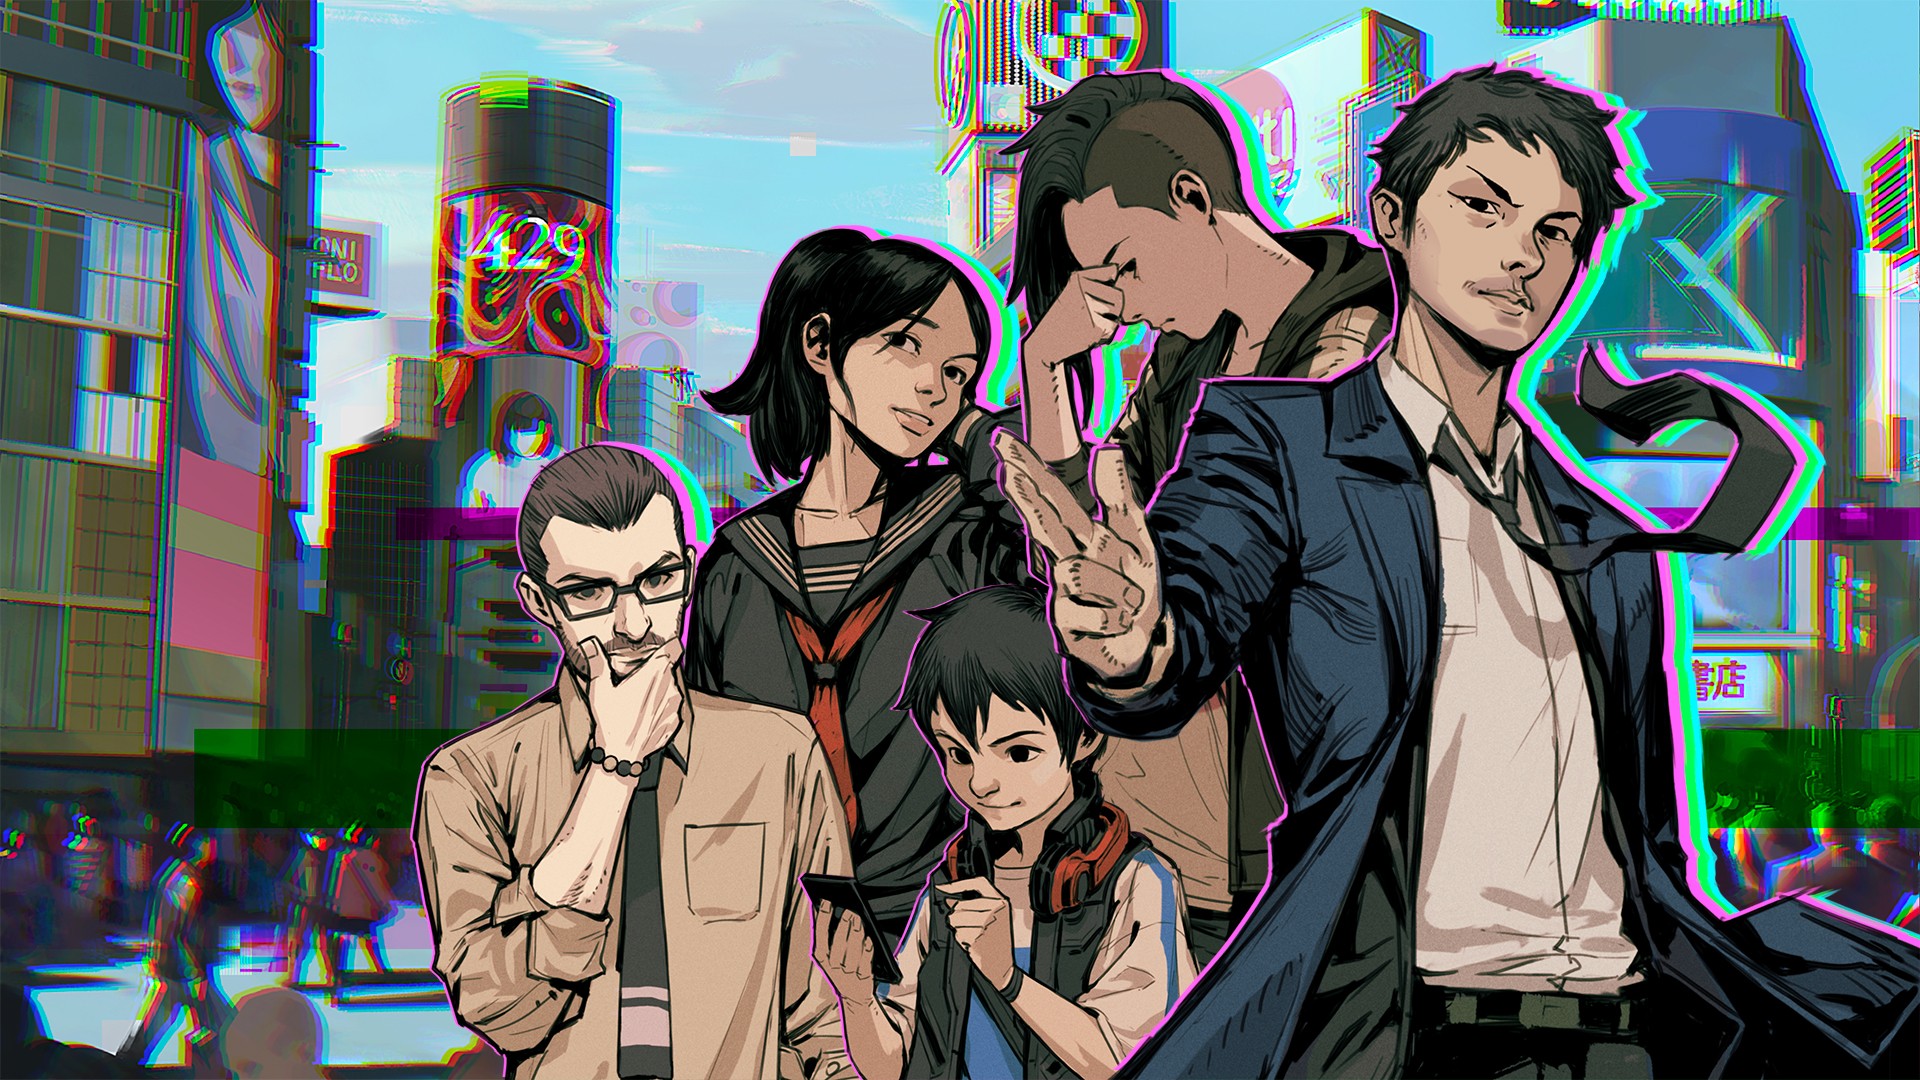 Play The Ghostwire: Tokyo Visual Novel For Free On Playstation 5 Today